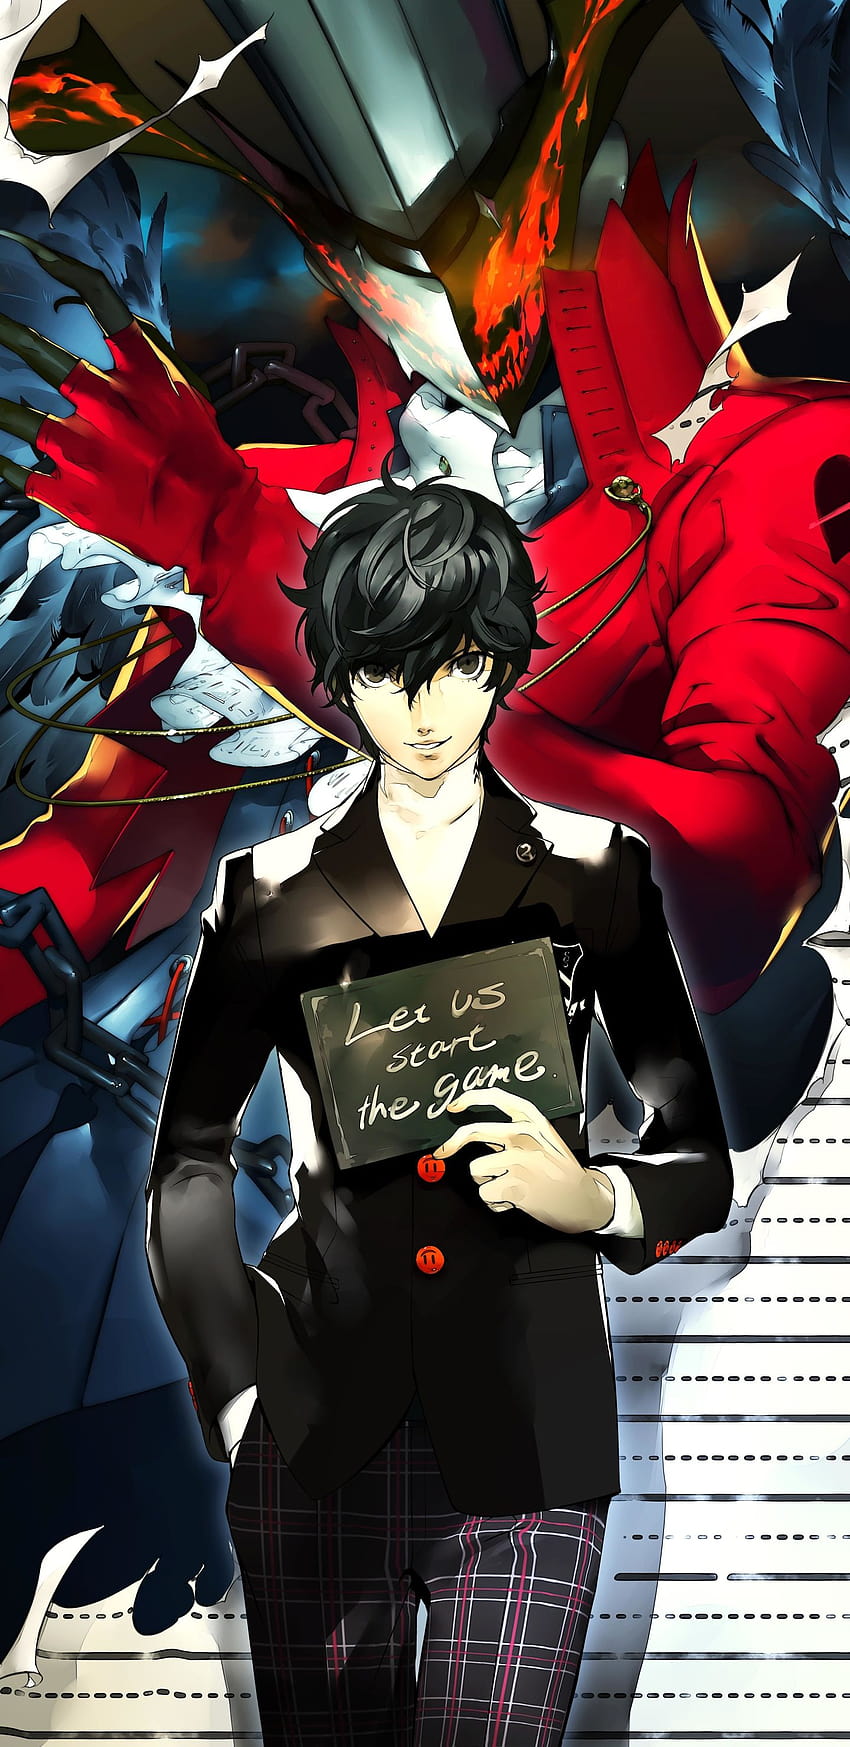 1440x2960 Persona 5 Samsung Galaxy Note 9,8, S9,S8,S Q, persona 5 royal android HD phone wallpaper